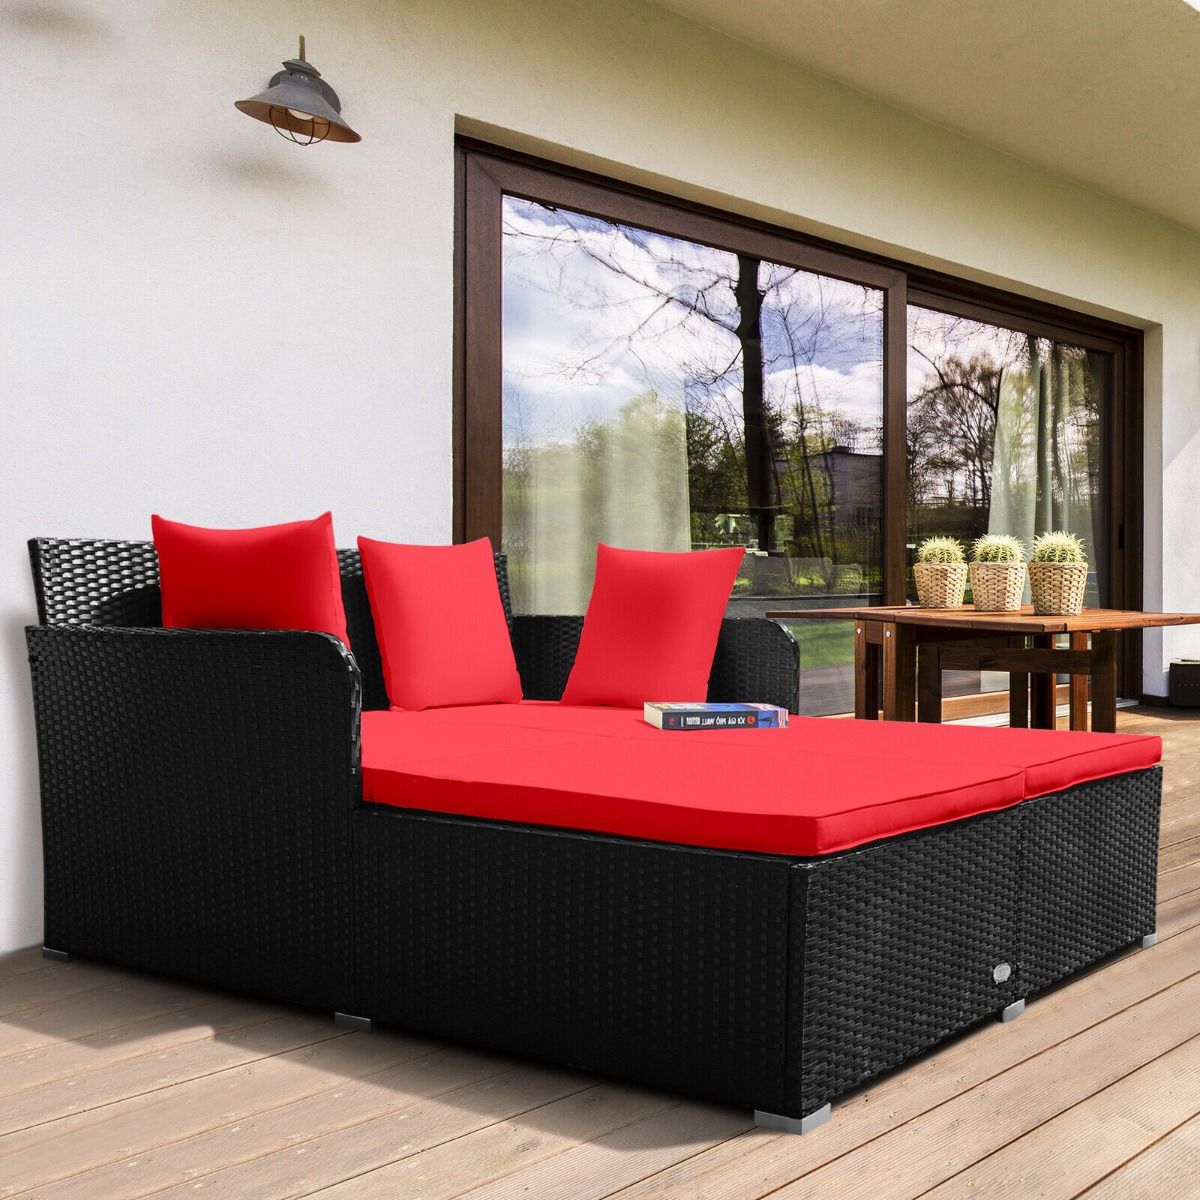 Rattan Garden 2 Seater Daybed Furniture Set with Cushions - Red